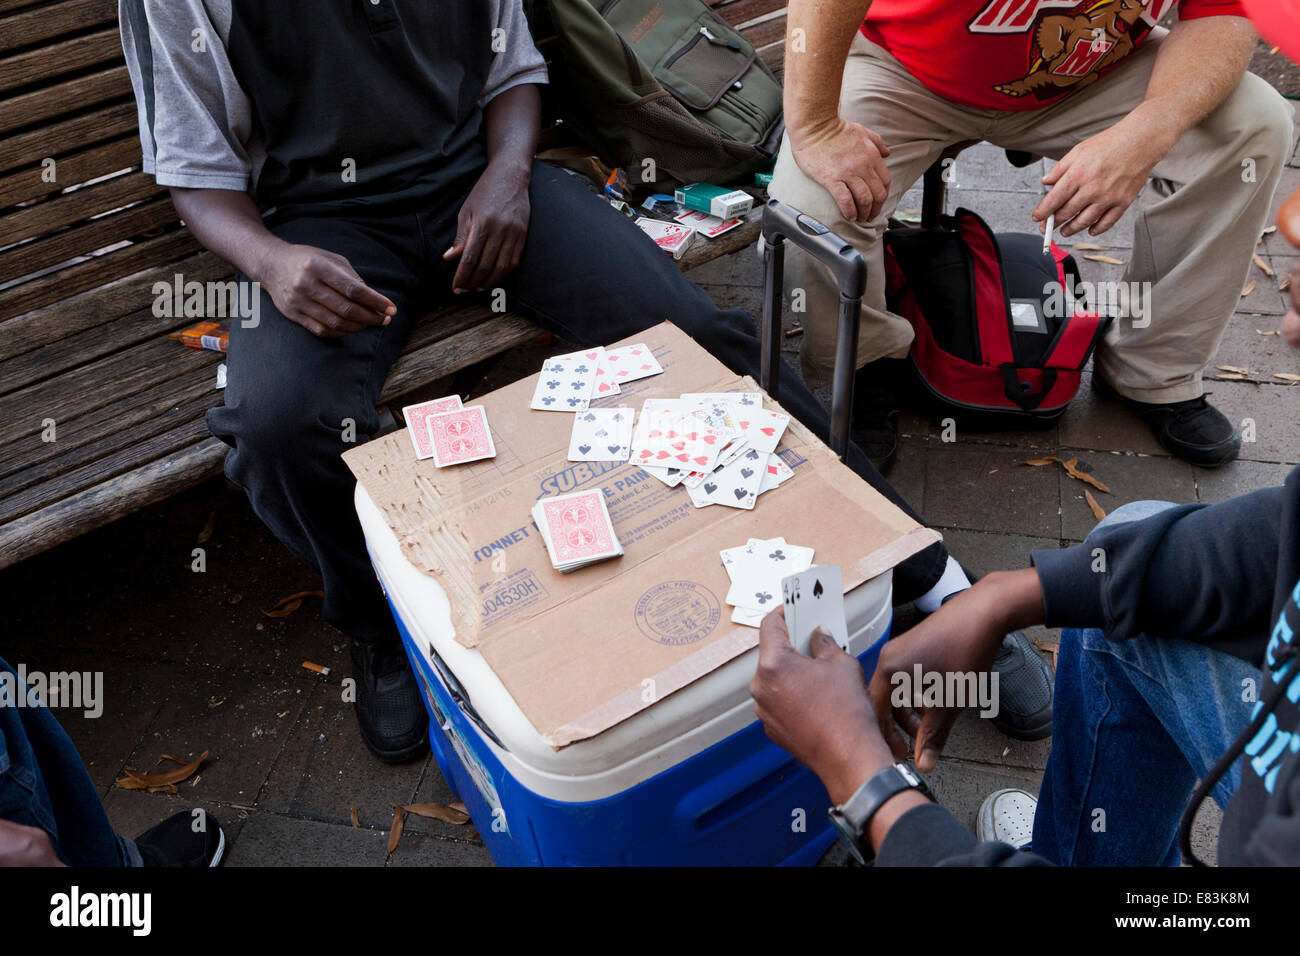 Men playing cards in public park bench - USA Stock Photo